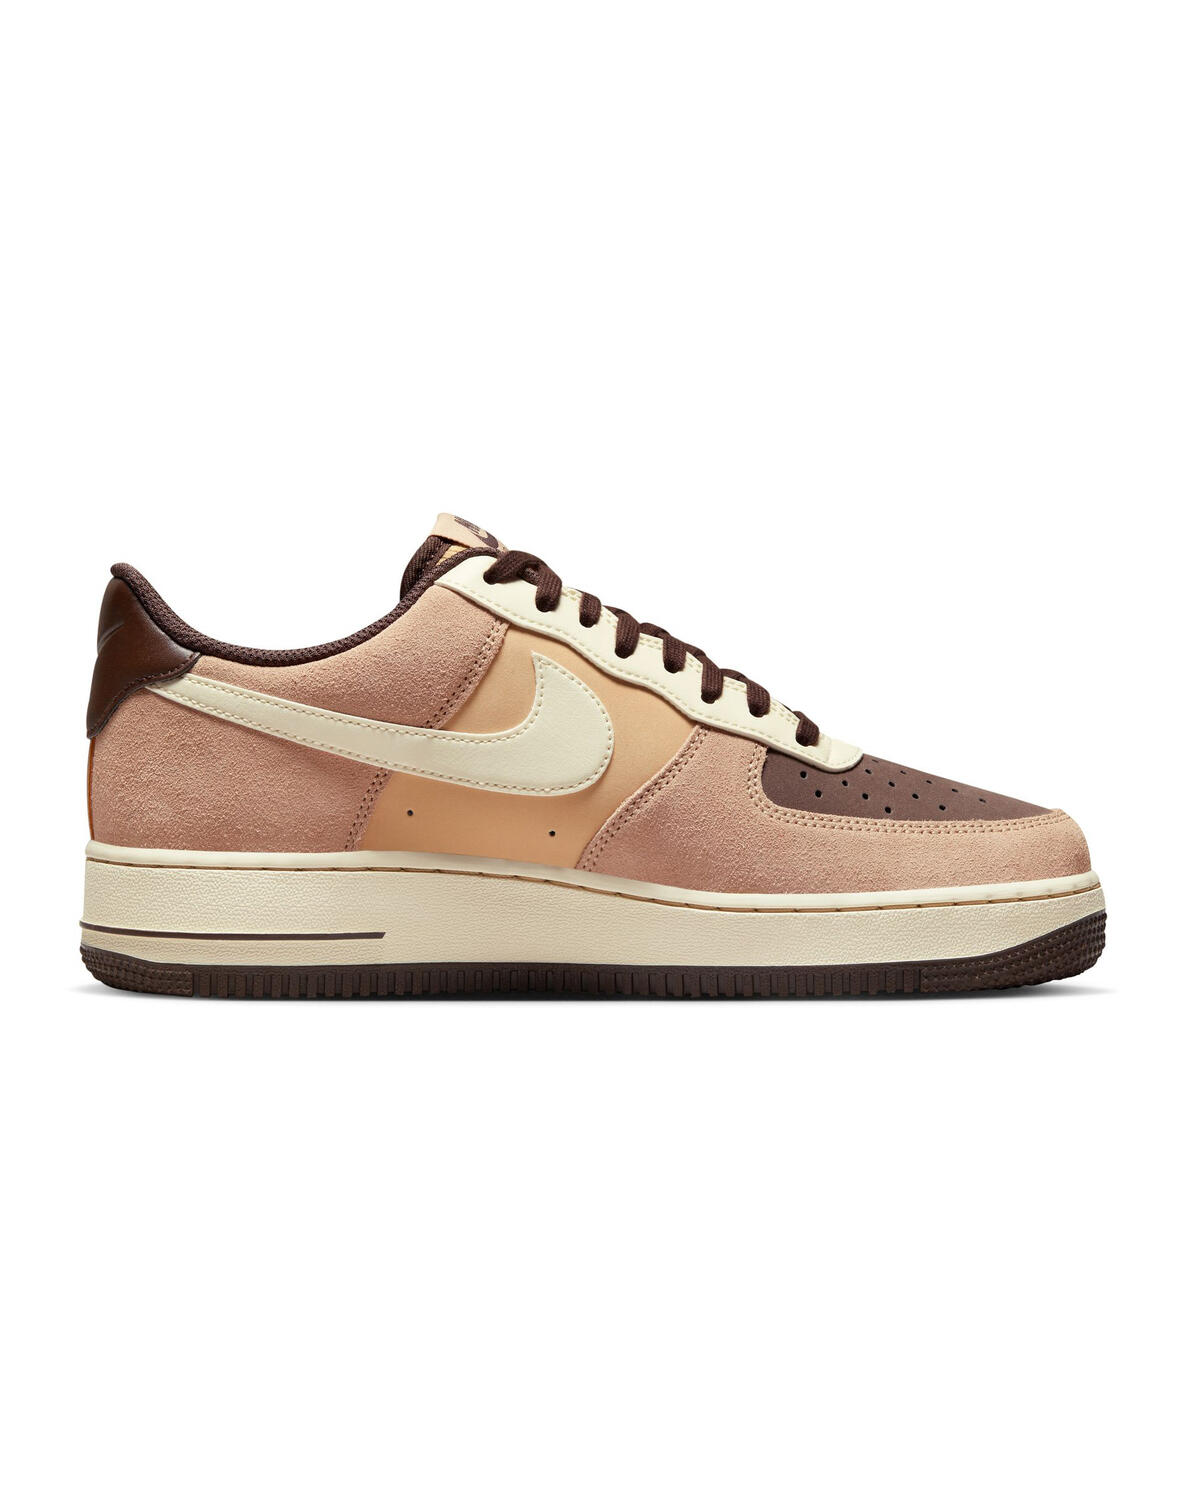 AmaflightschoolShops STORE  Nike first Air Force 1 Low 82 Sail